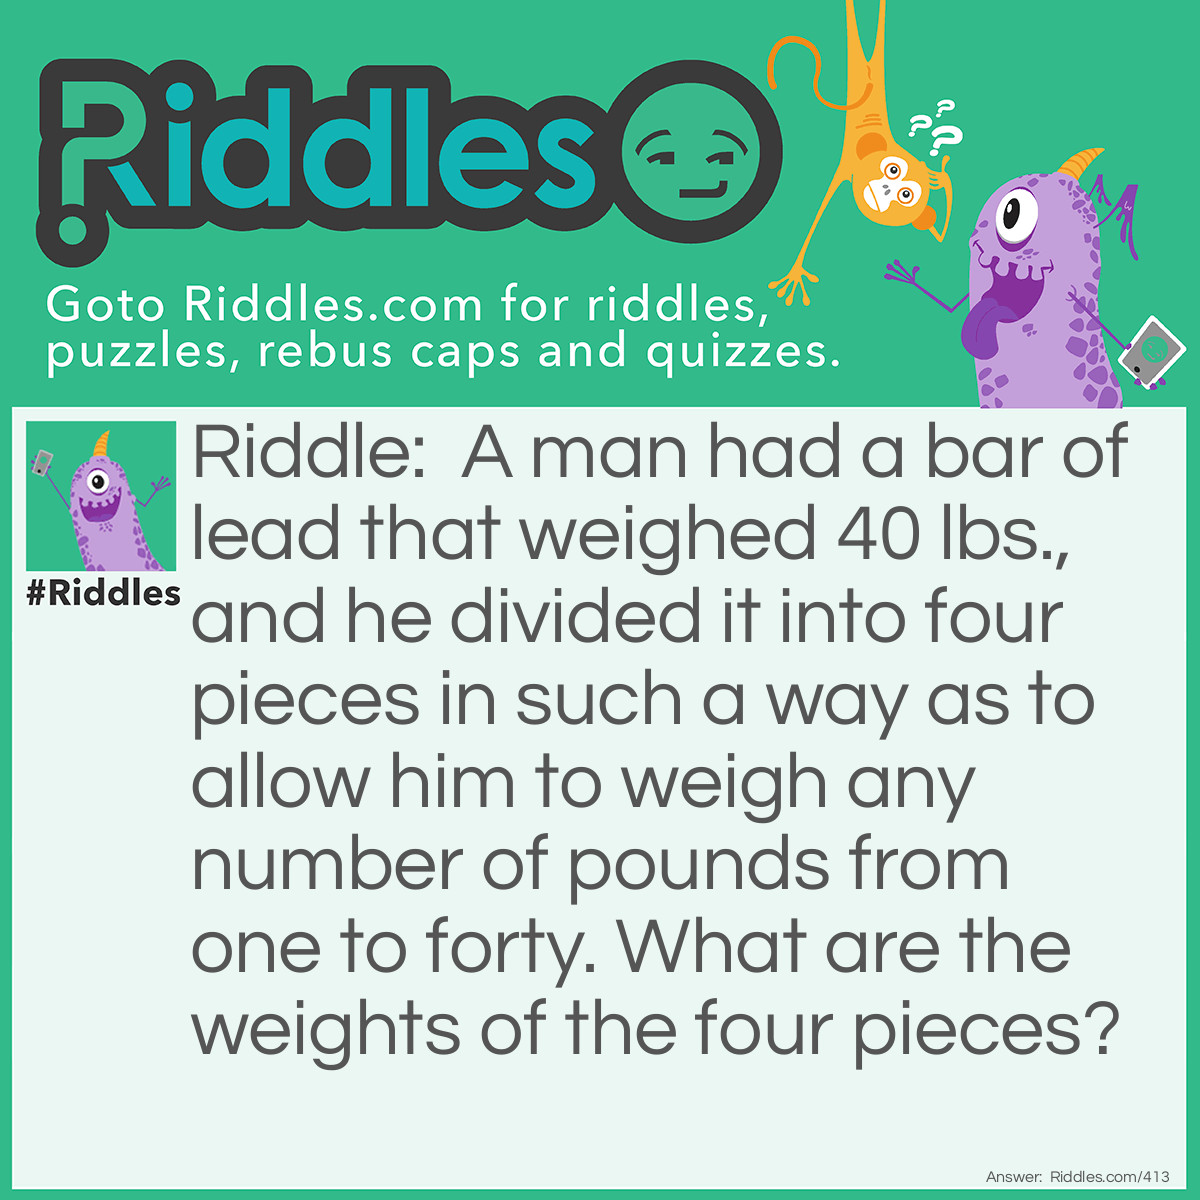 Riddle: A man had a bar of lead that weighed 40 lbs., and he divided it into four pieces in such a way as to allow him to weigh any number of pounds from one to forty. What are the weights of the four pieces? Answer: 1, 3, 9, 27, are the weights of the four pieces.